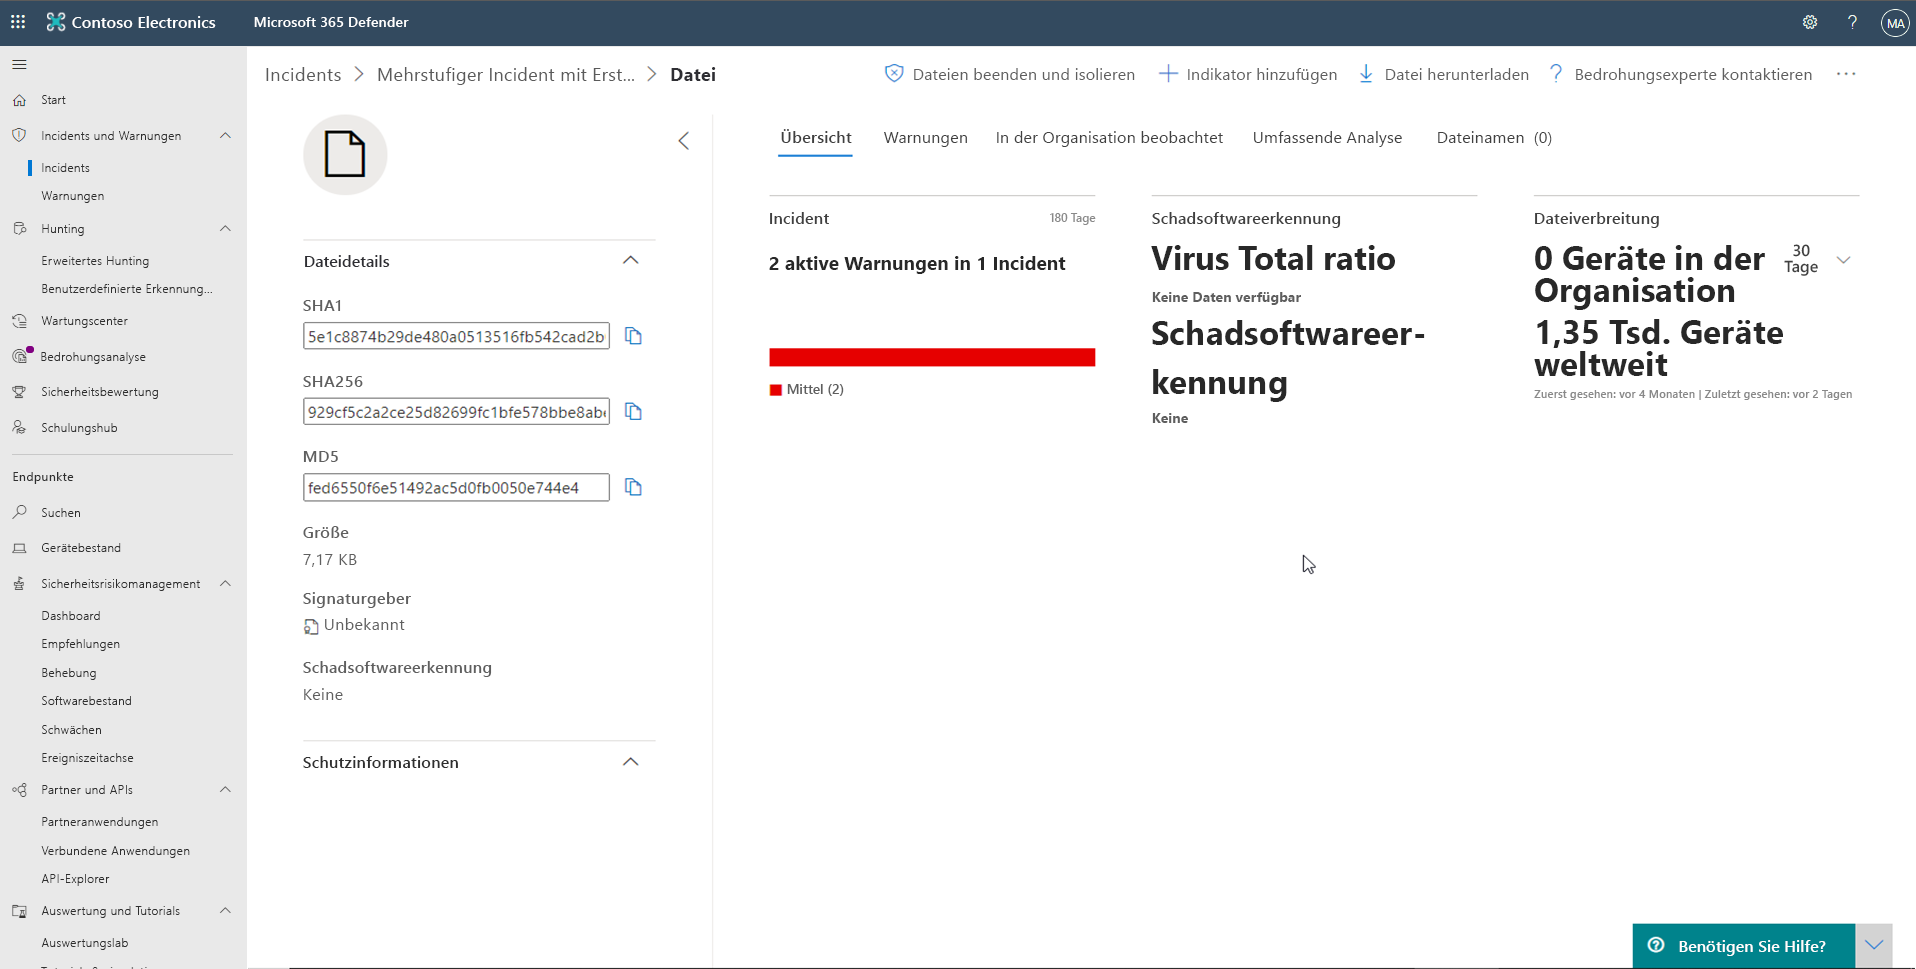 Screen shot of the Microsoft Defender for Endpoint File page information.